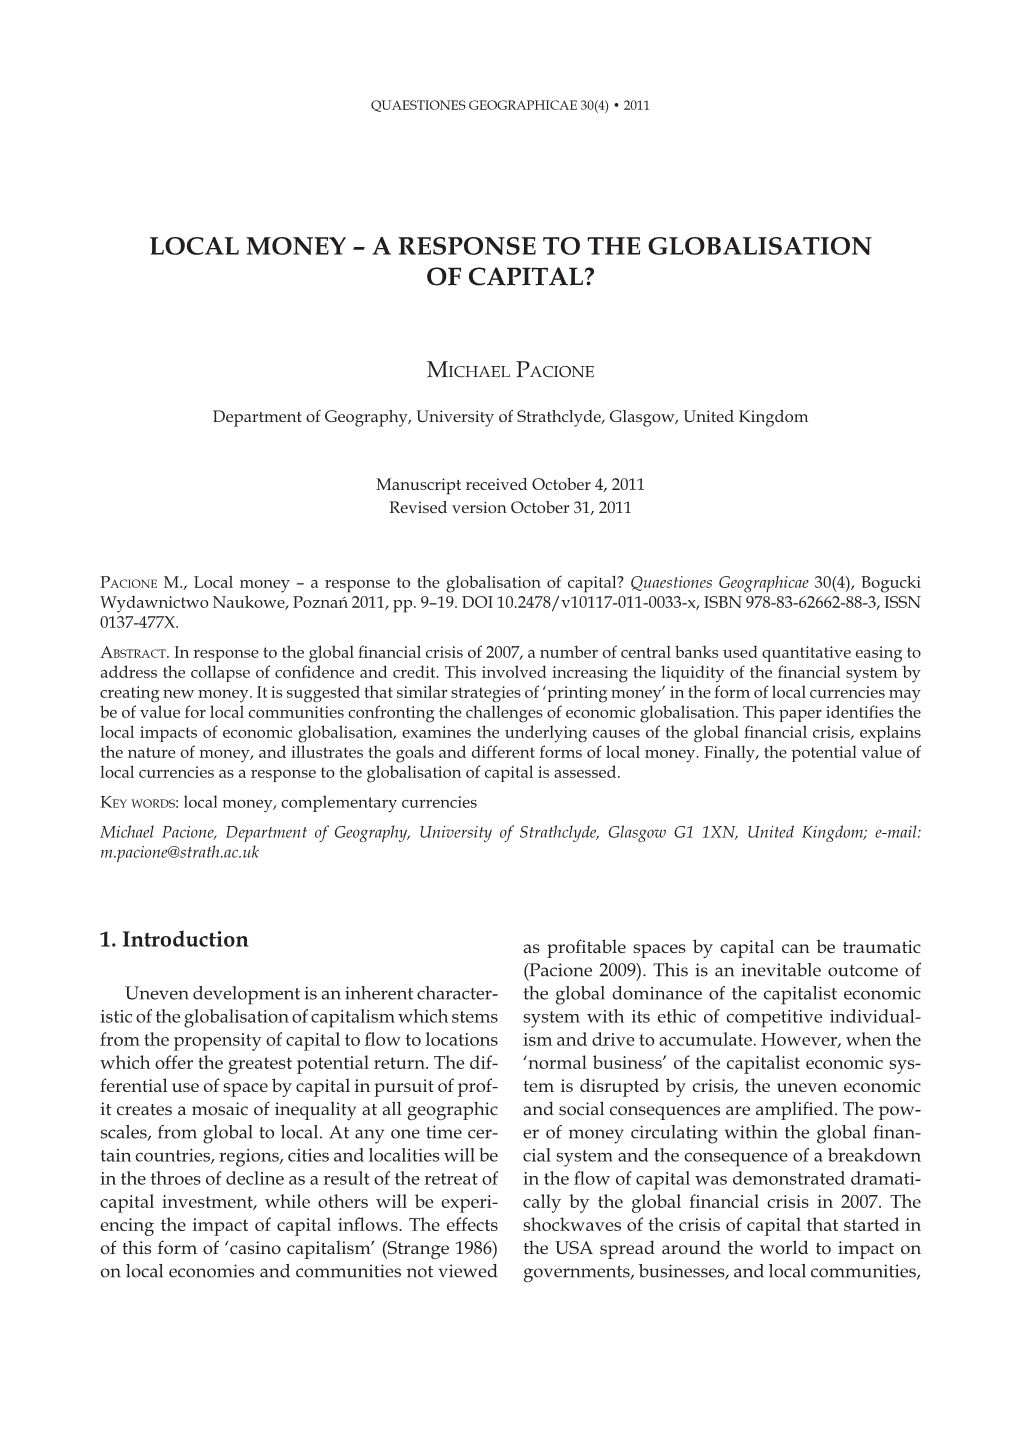 Local Money – a Response to the Globalisation of Capital?